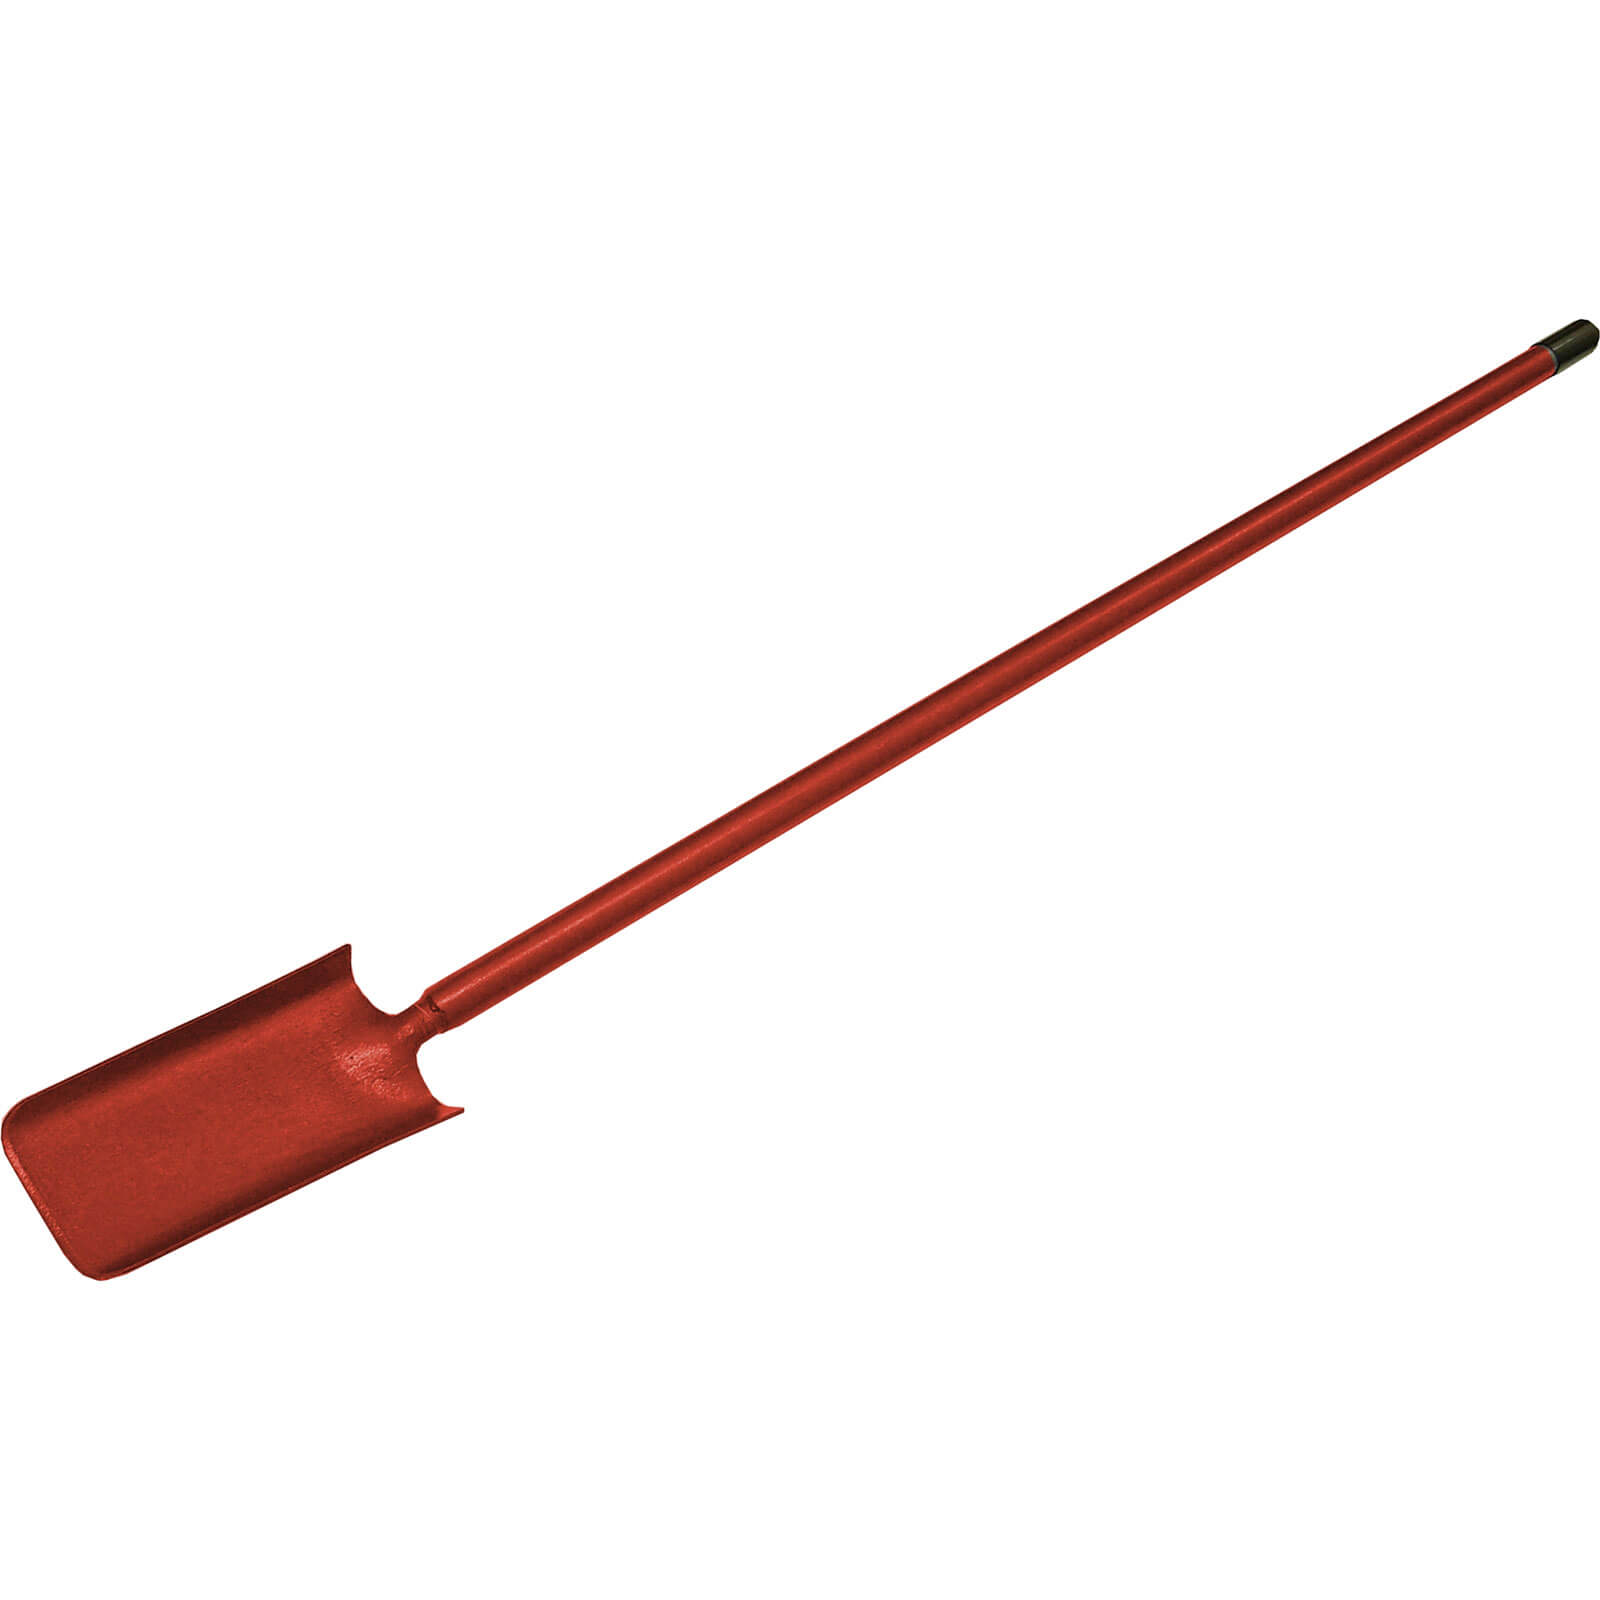 Faithfull All Steel Fencing Spade with Taper Blade 1.4 Metre